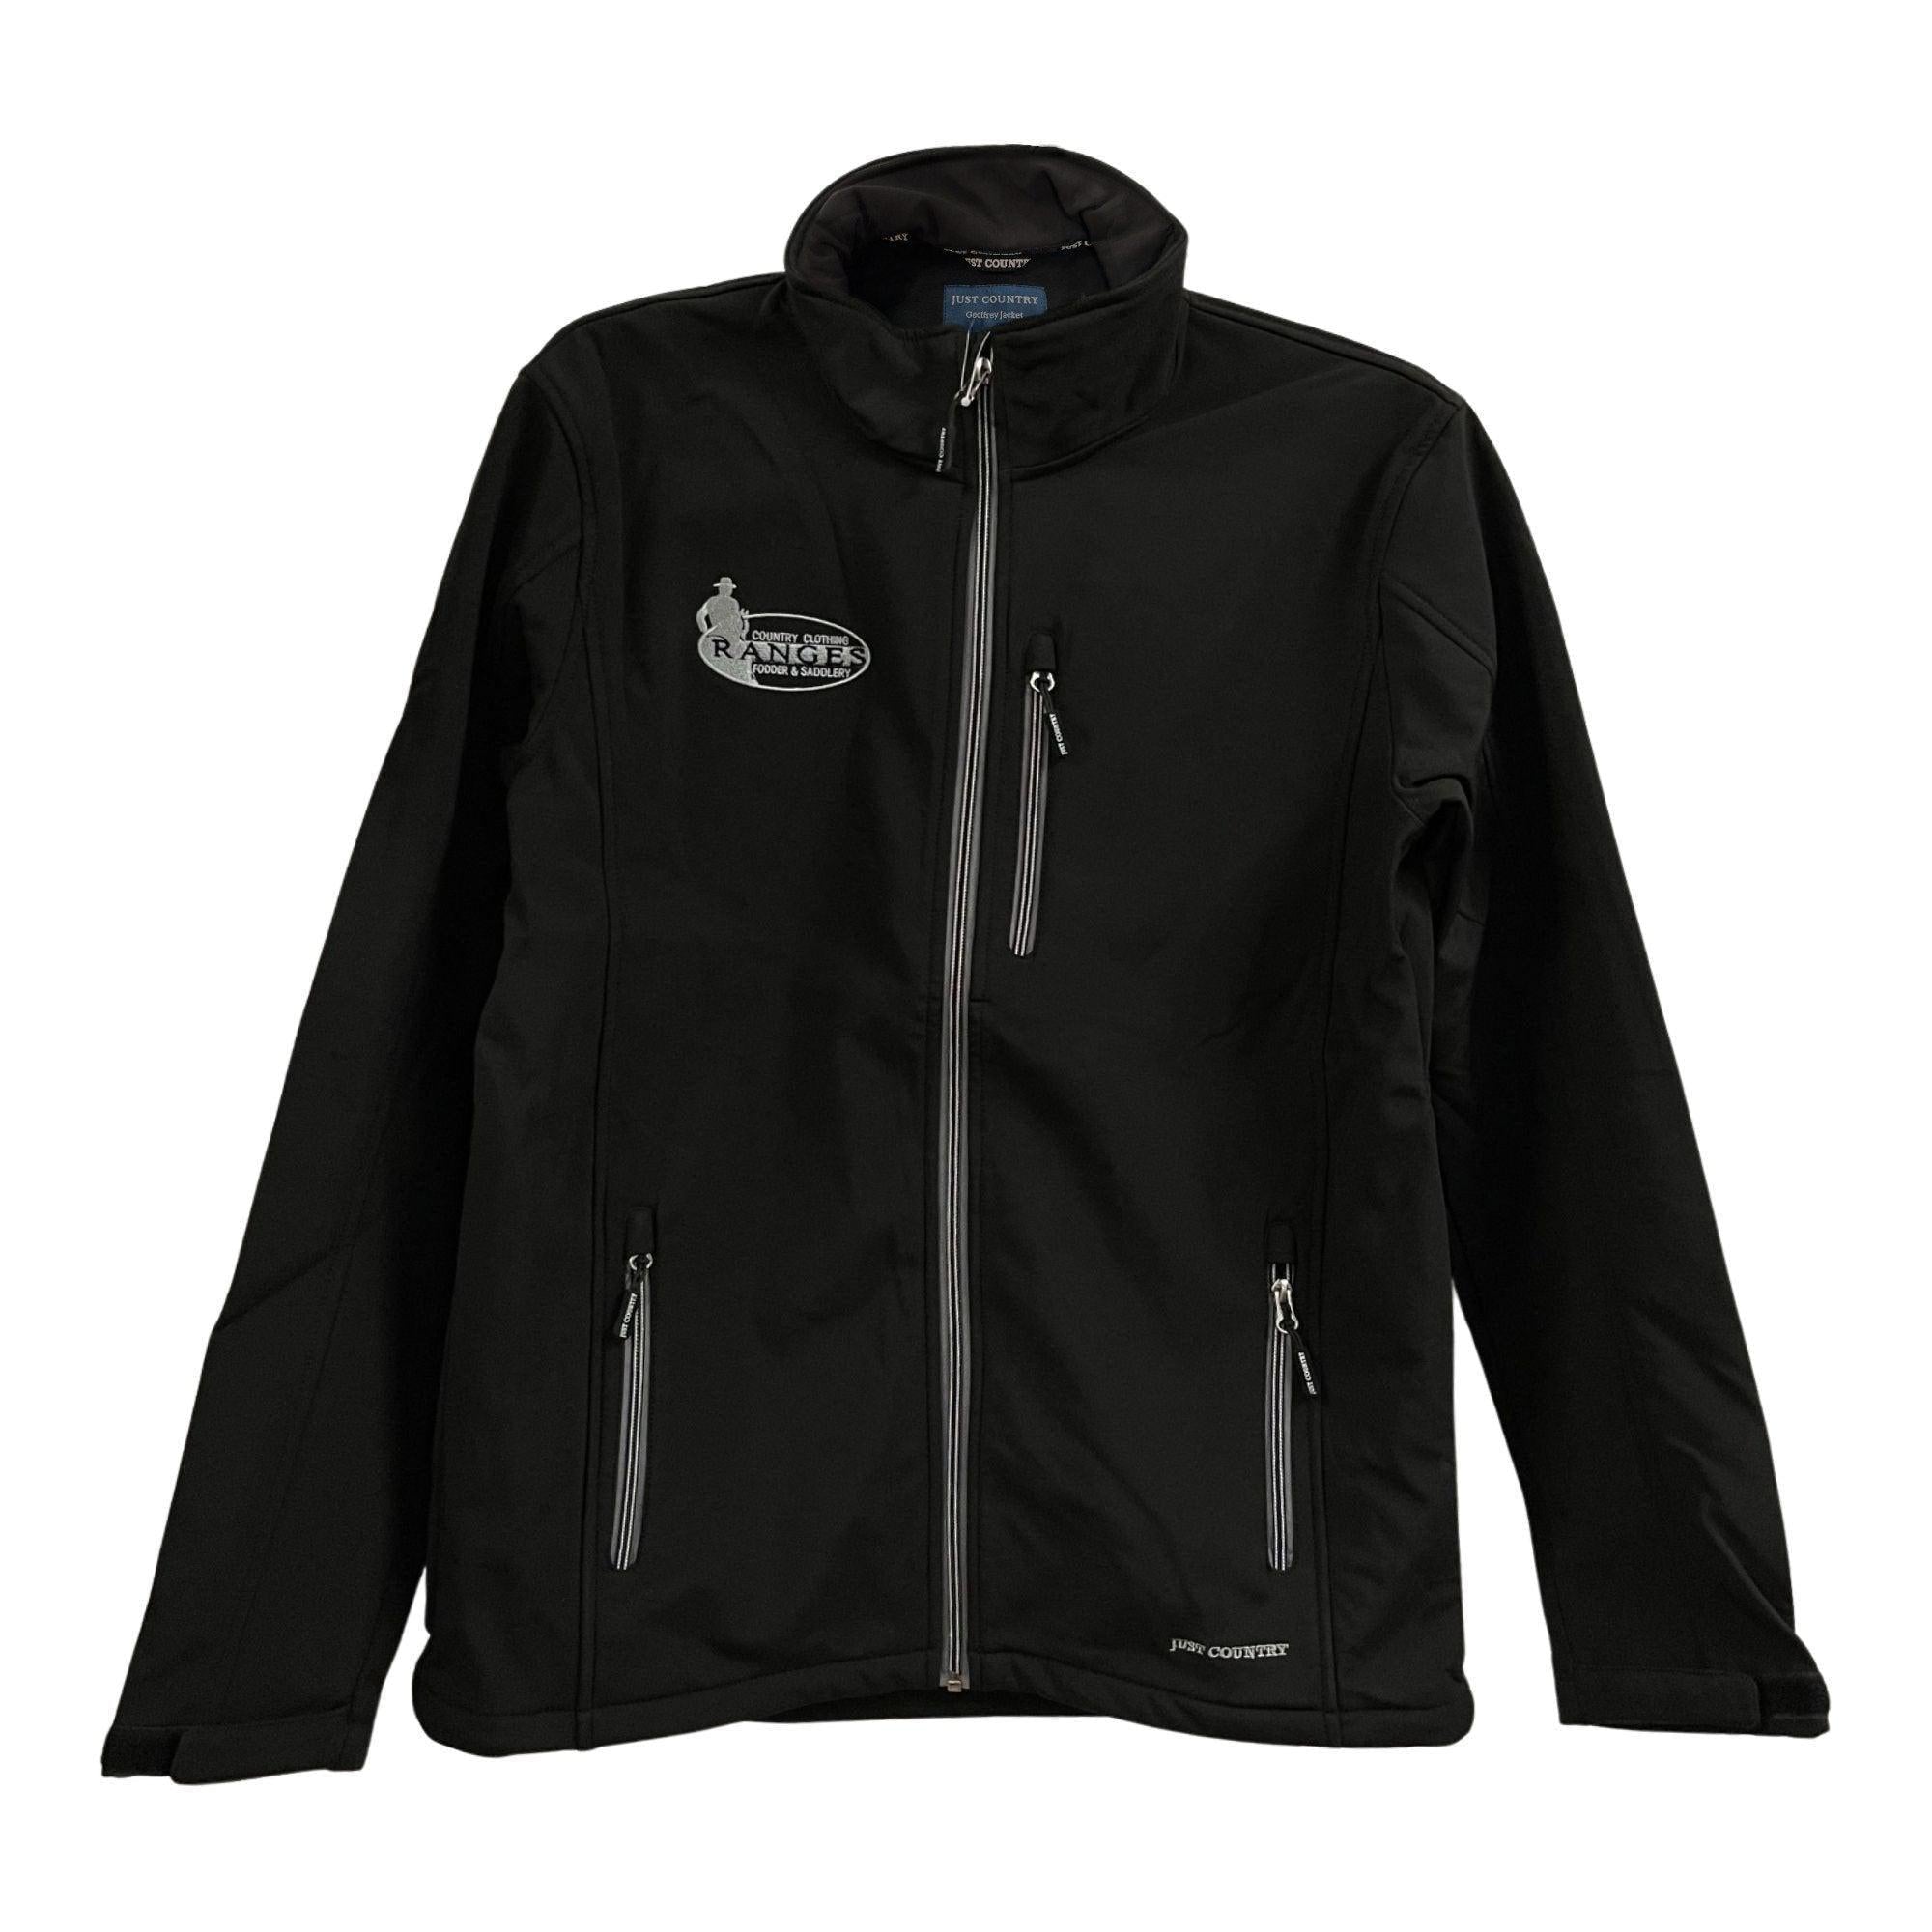 RANGES COUNTRY MENS LOGO JACKET-Ranges Country